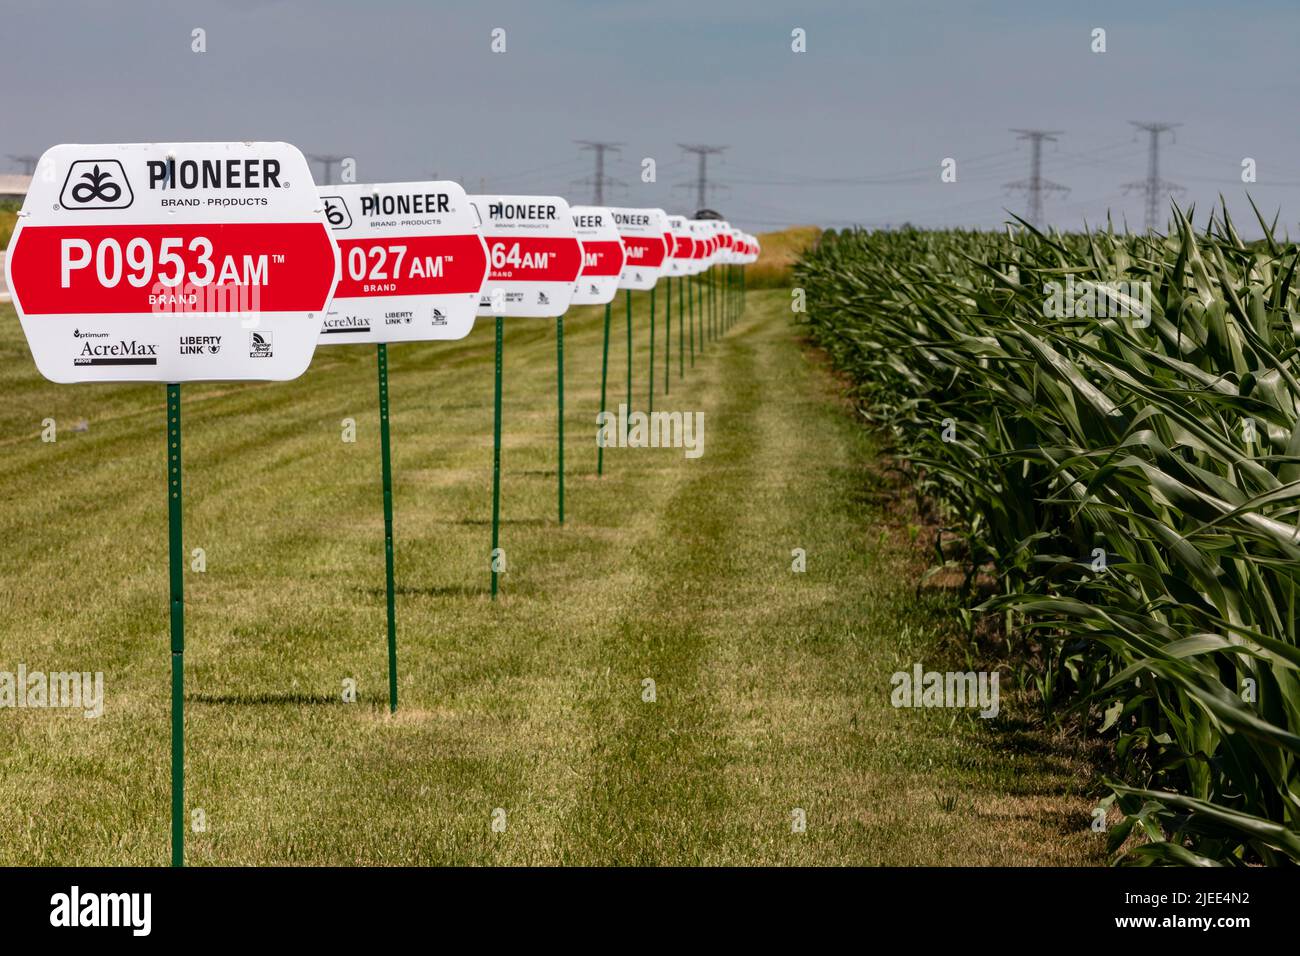 Eureka, Illinois - Varieties of corn growing from seeds produced by Pioneer, a DuPont company. Nearly all corn grown in the United States is genetical Stock Photo